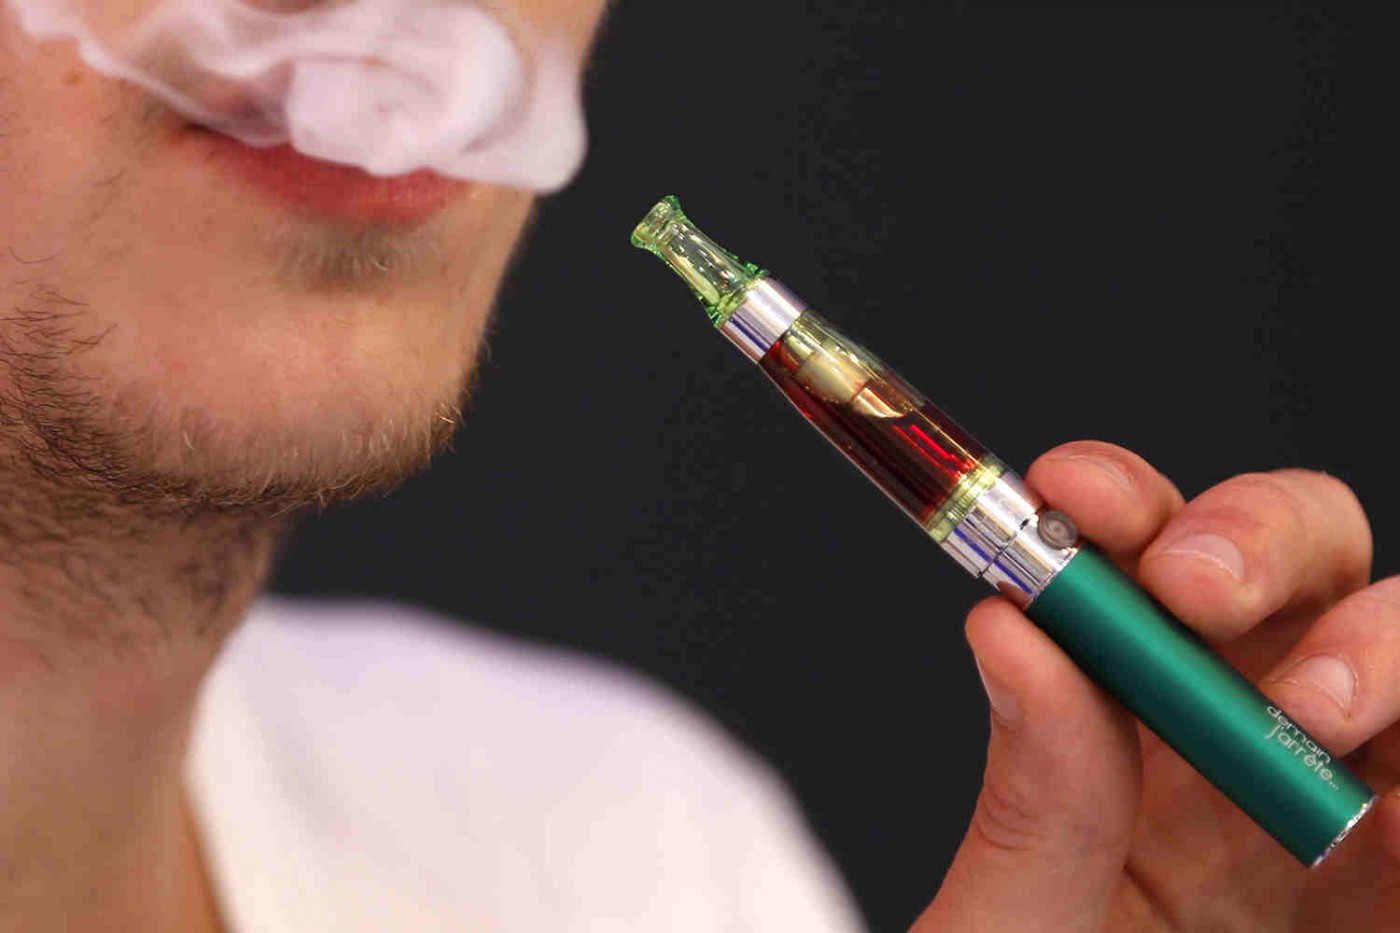 Study Finds 10 Times More Carcinogens in E-Cig Fluid Compared to Cigarettes